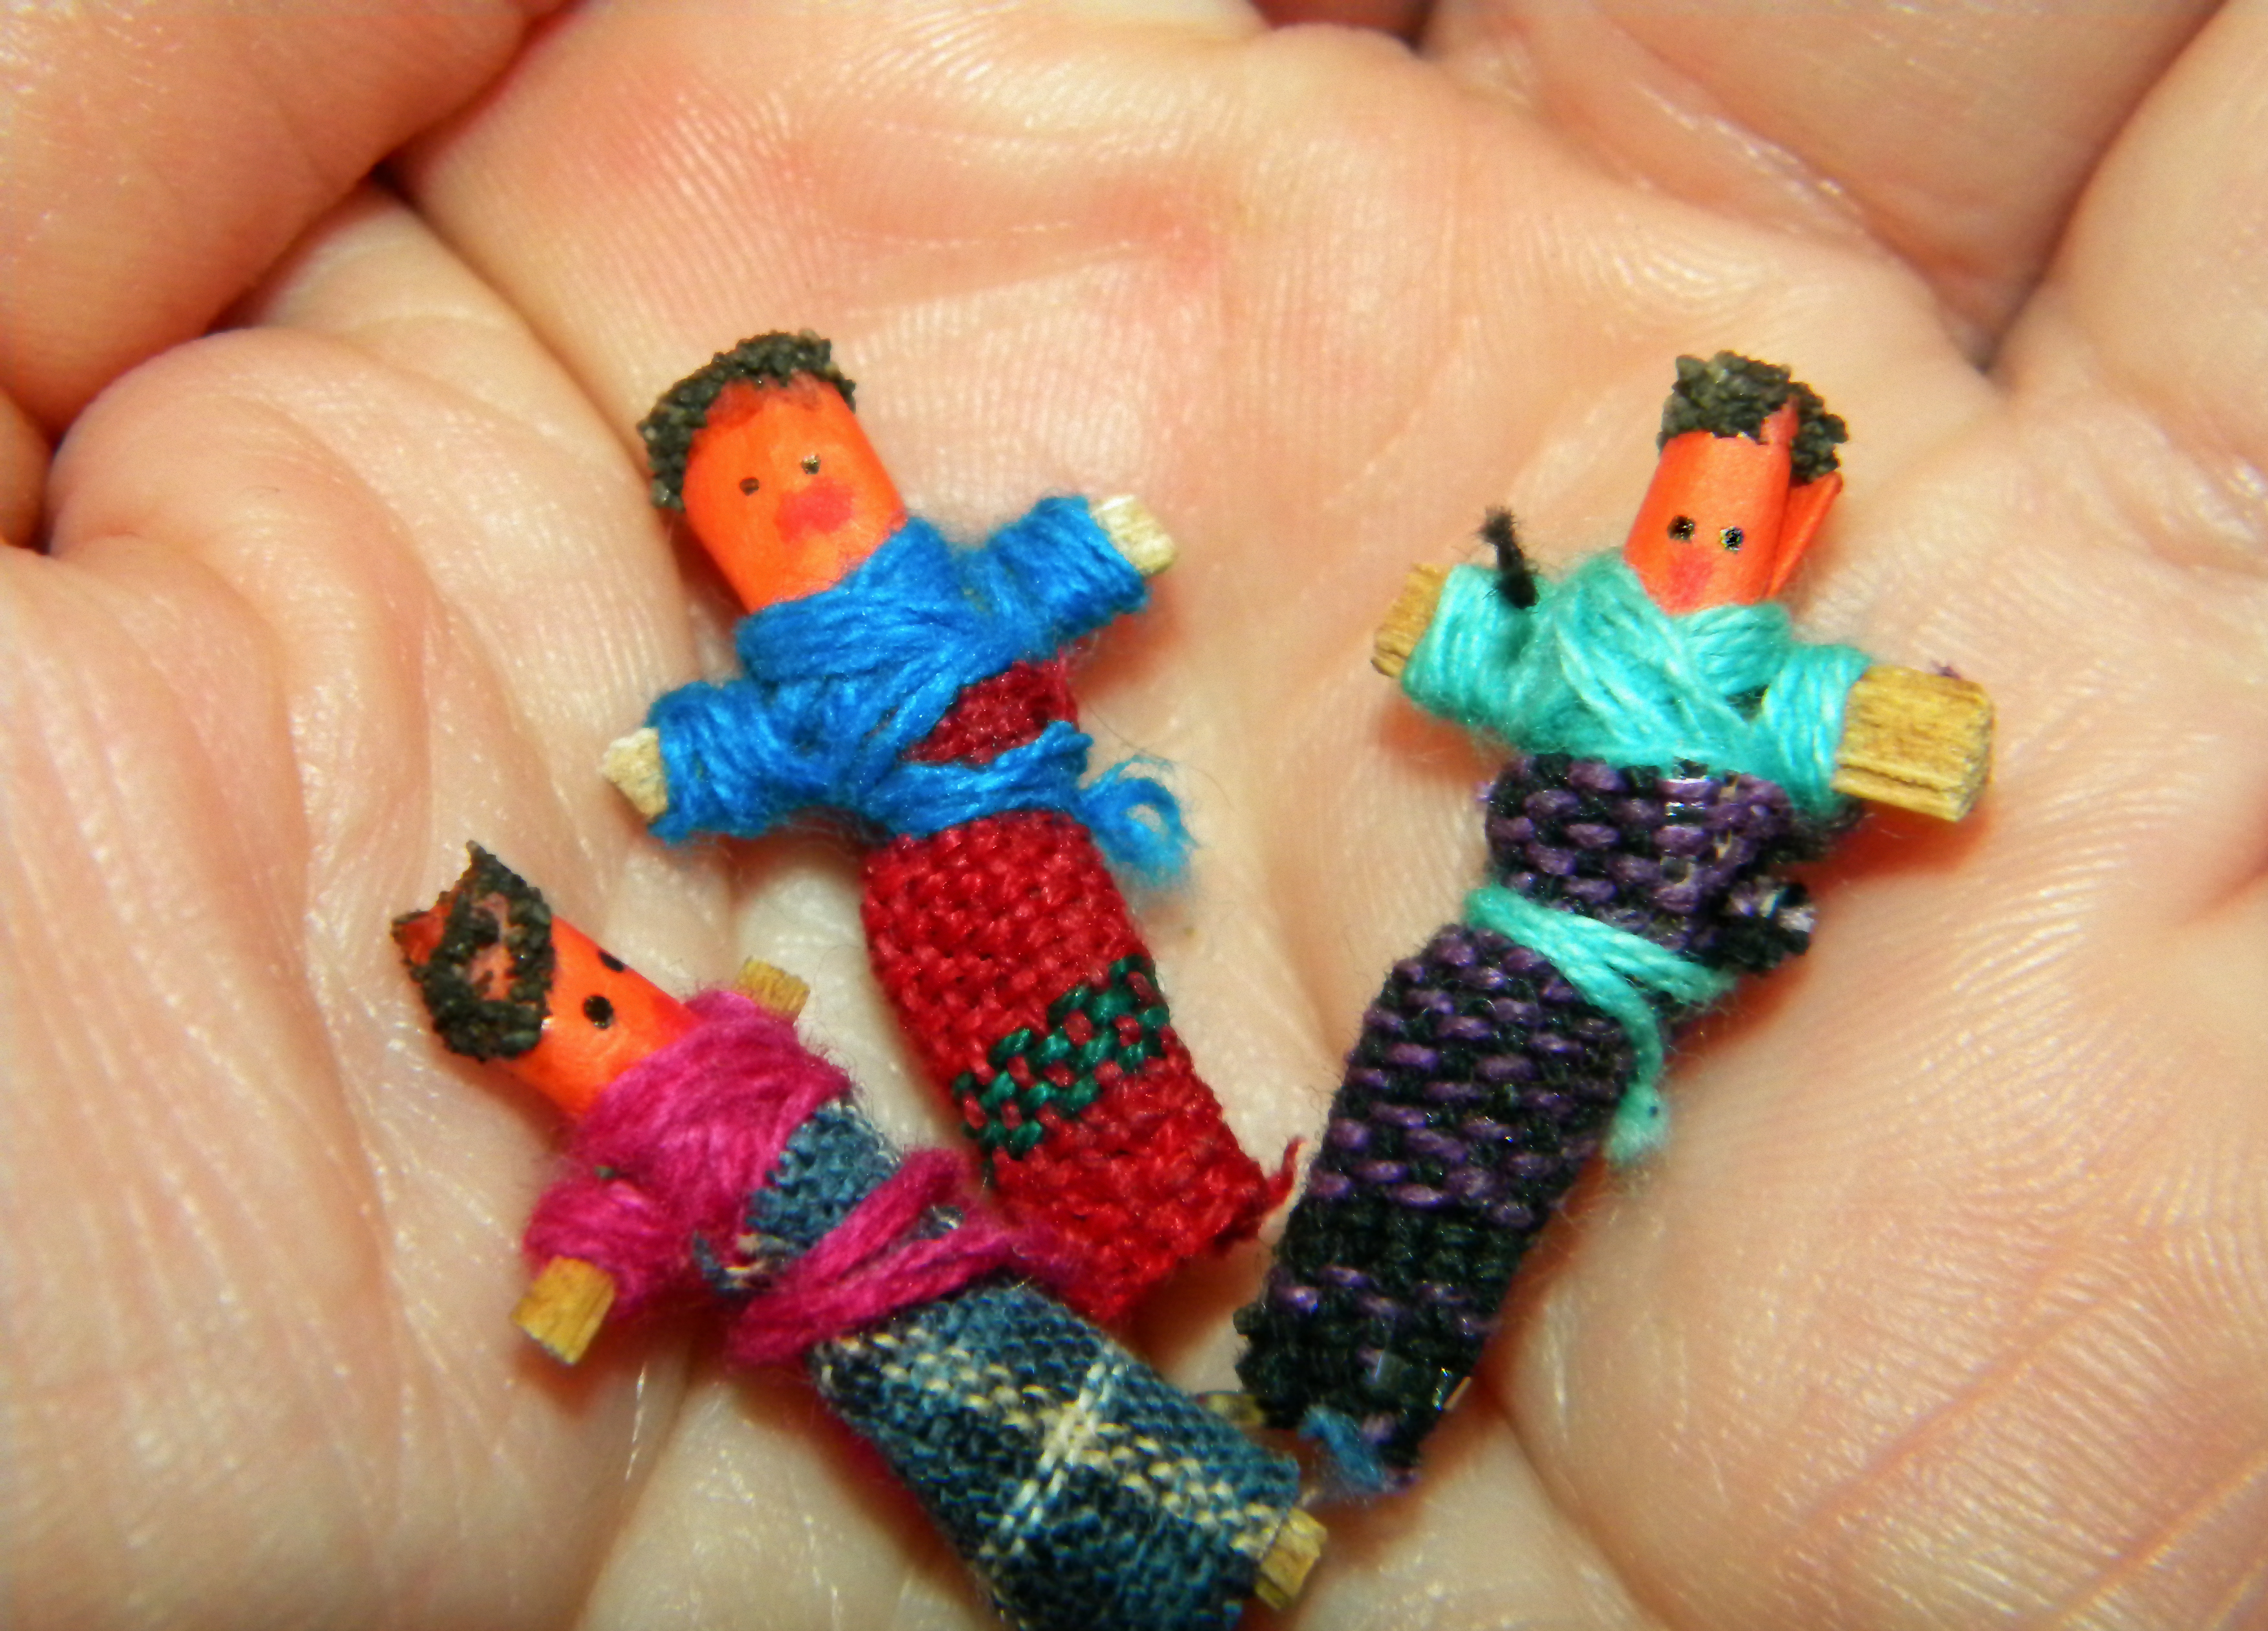 Small Worry Dolls being held